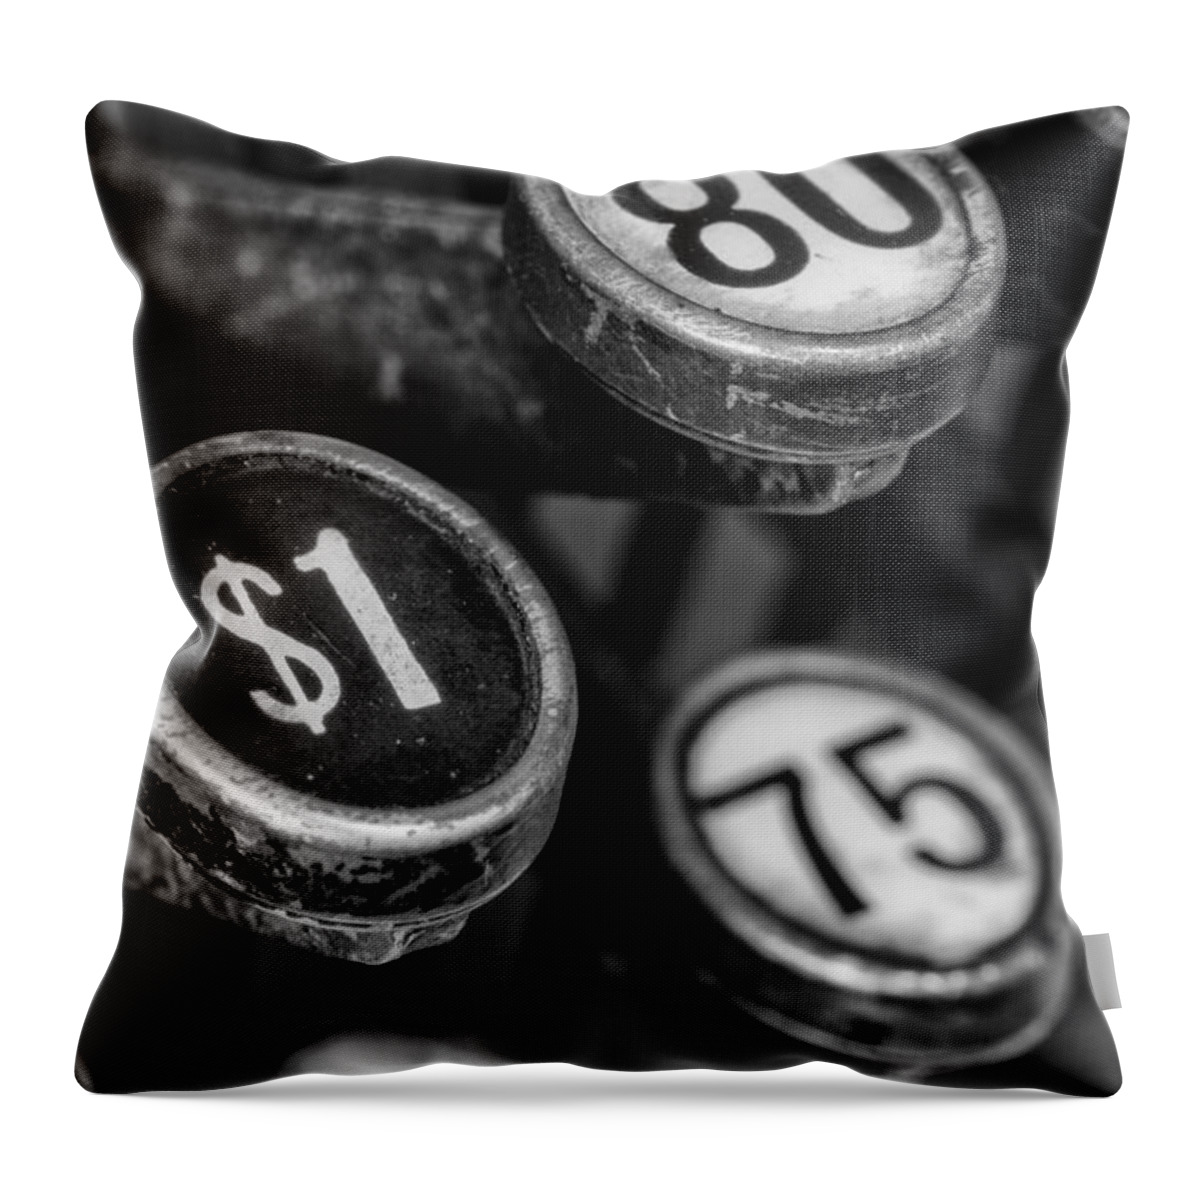 Money Throw Pillow featuring the photograph Cash Register I by Denise Bush